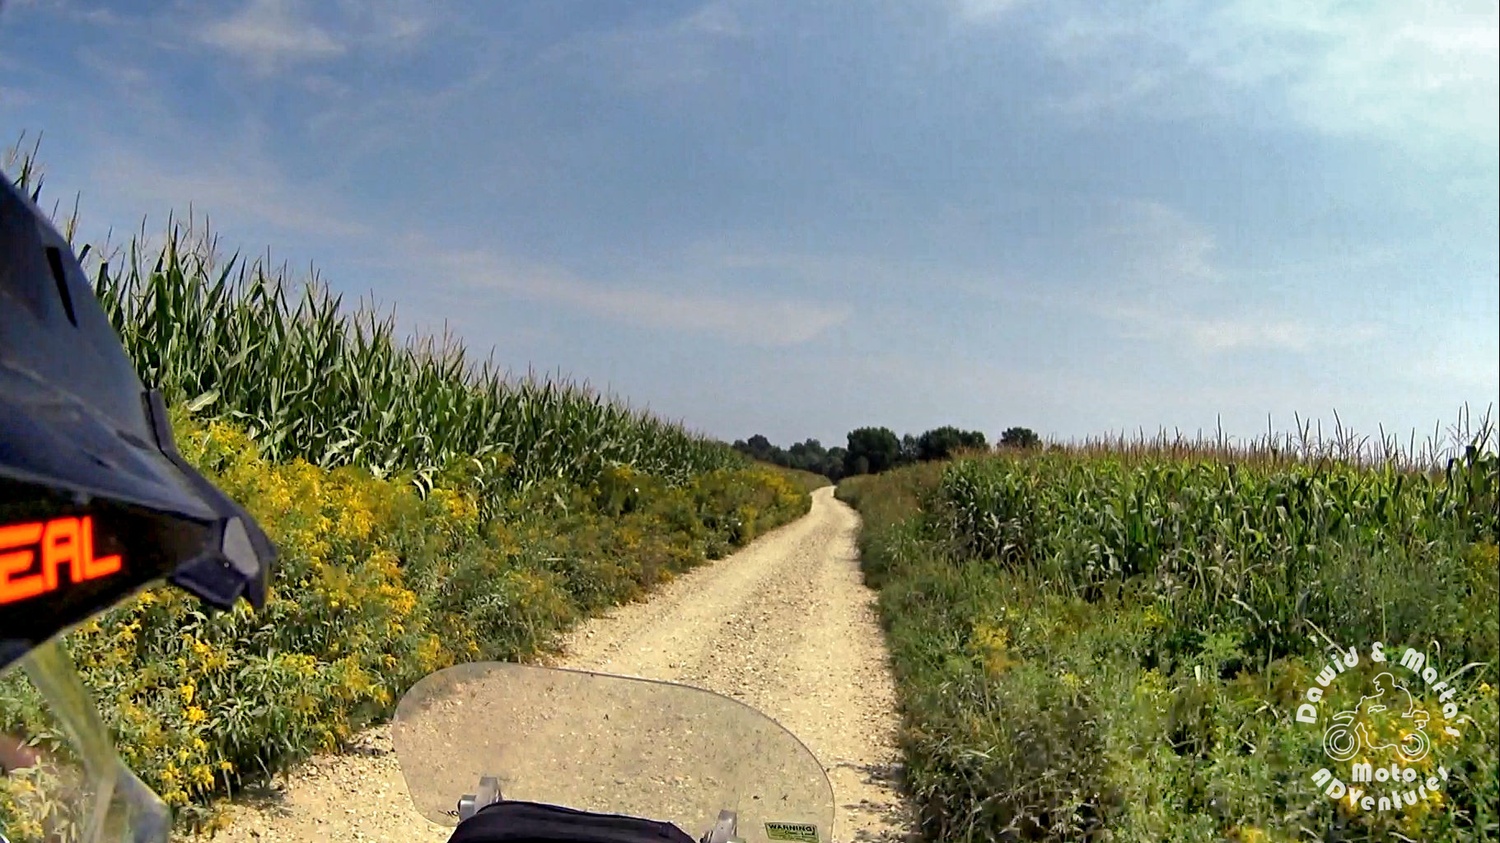 Leaving camping at the Drava River and riding offroad through the gravel road leading by the corn fields